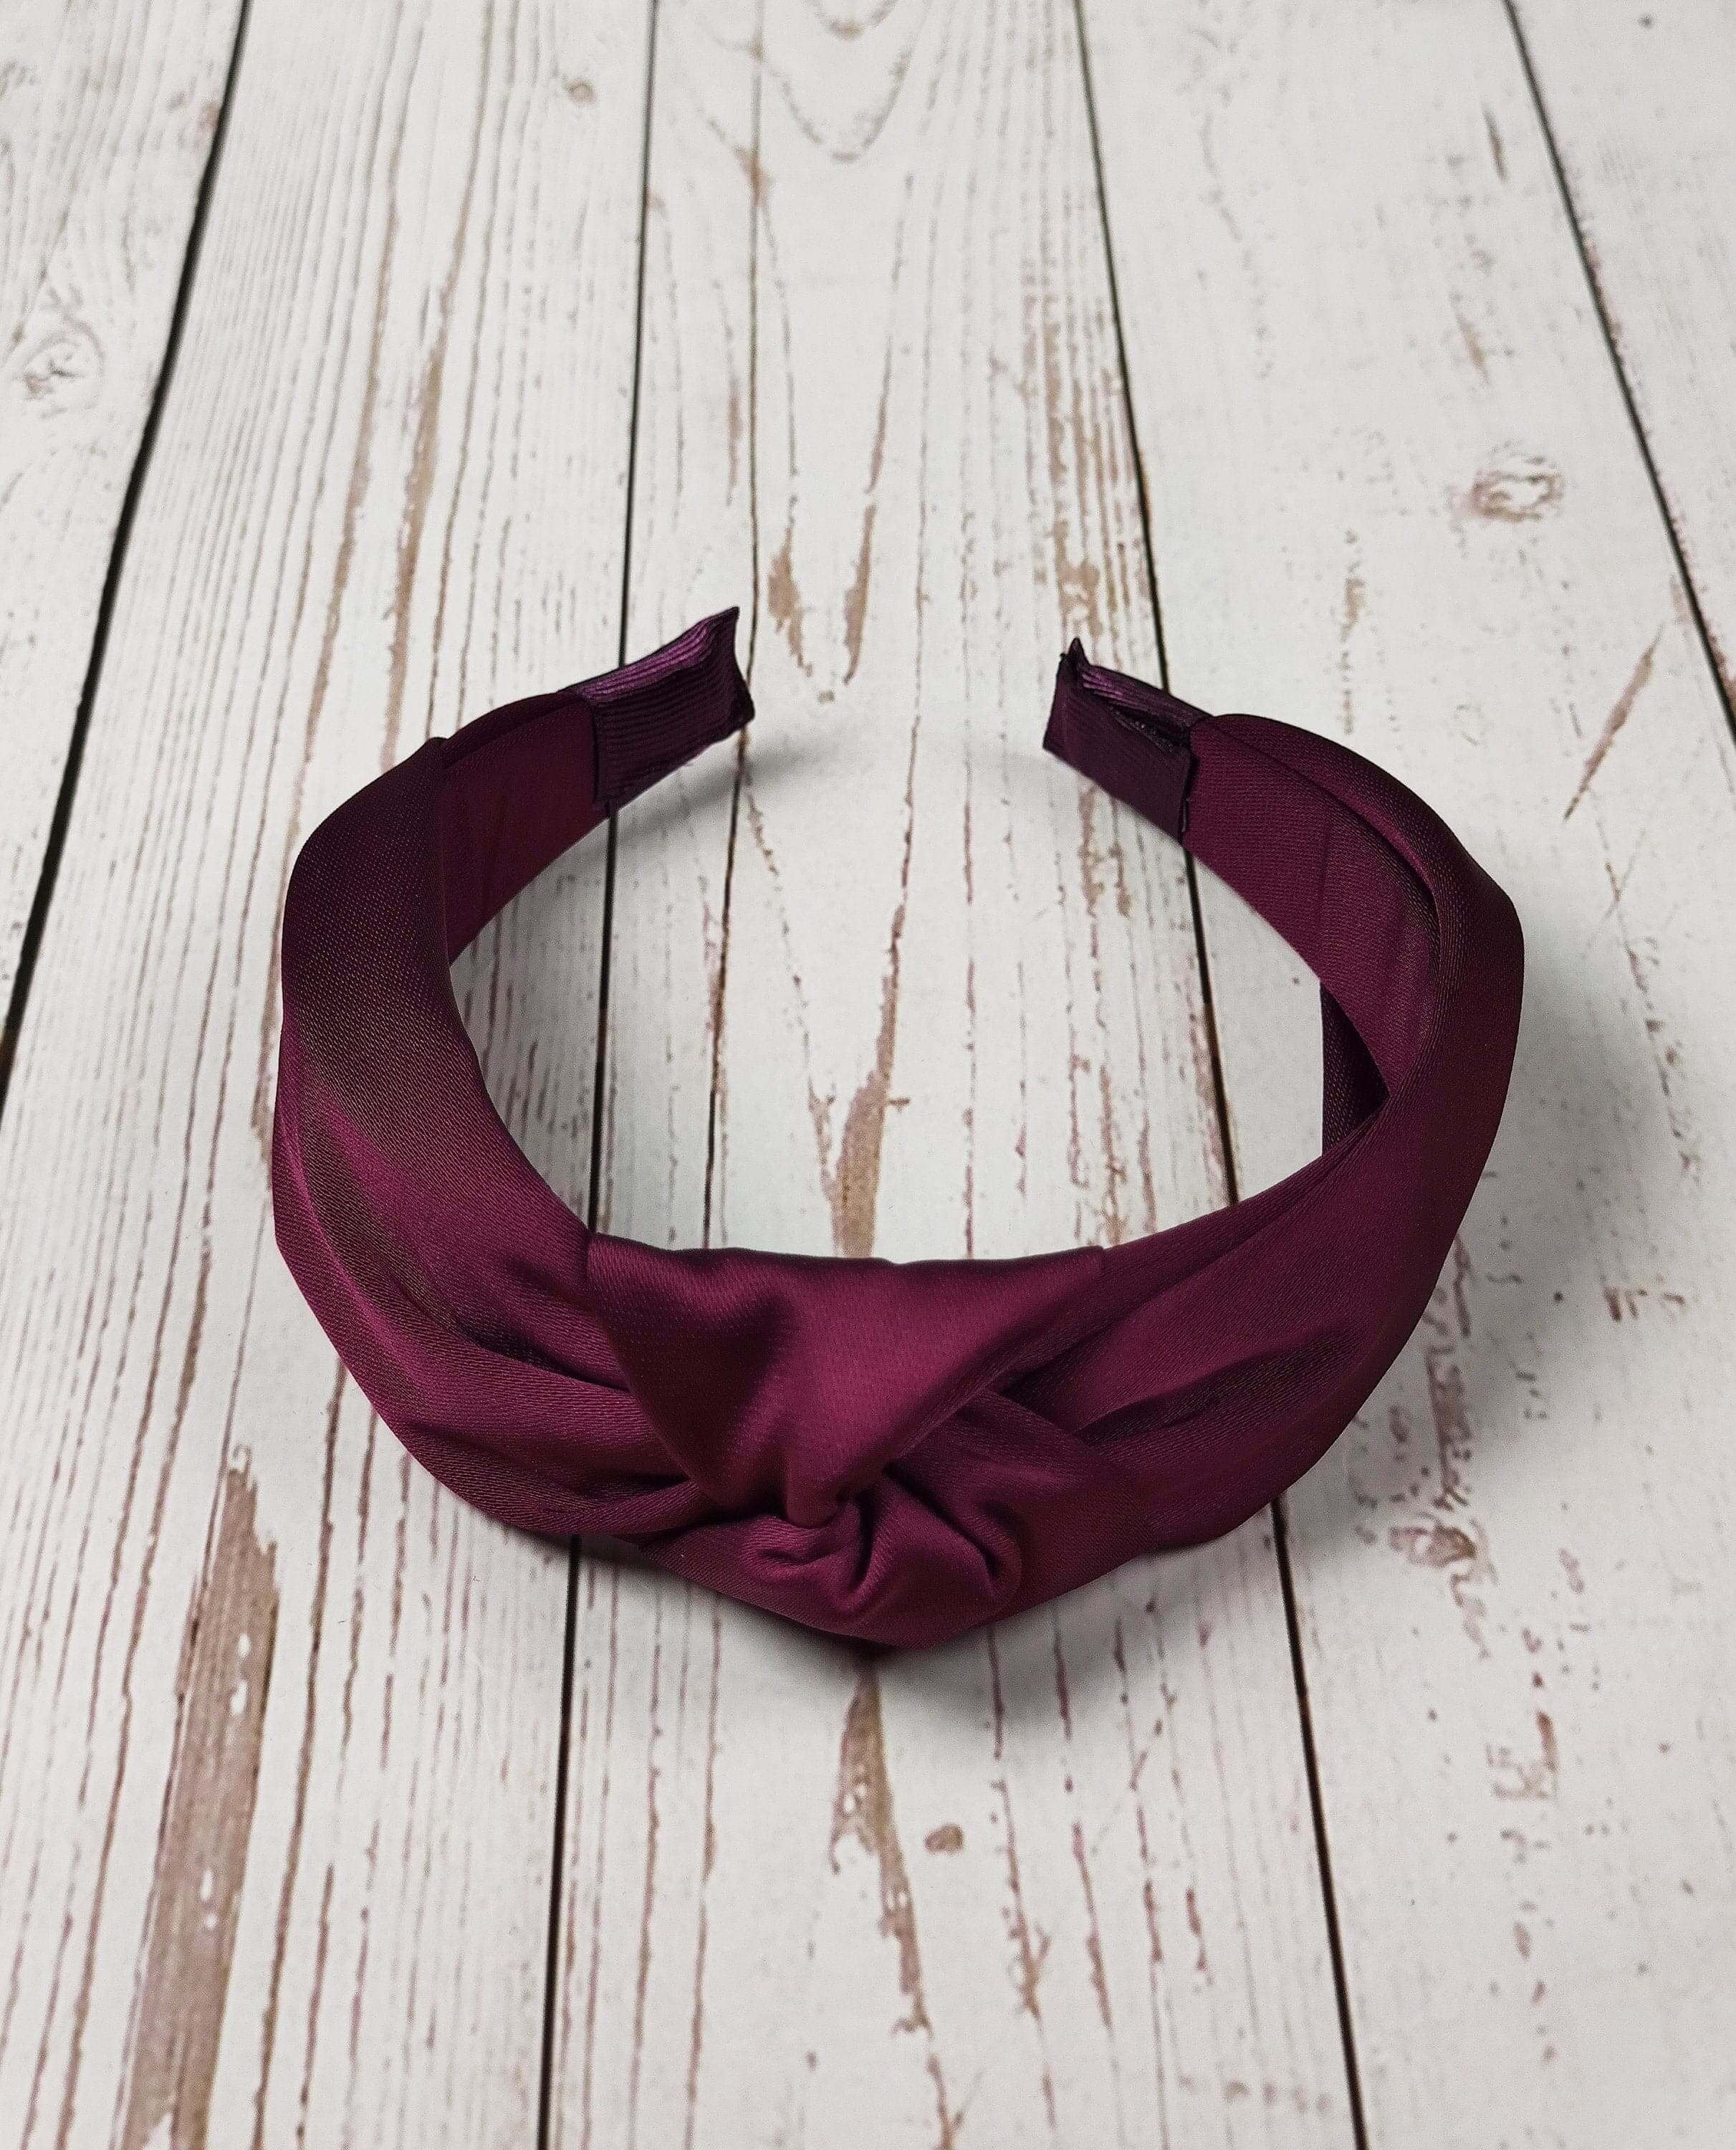 Elevate your accessory game with this chic and versatile maroon satin headband, perfect for any season.